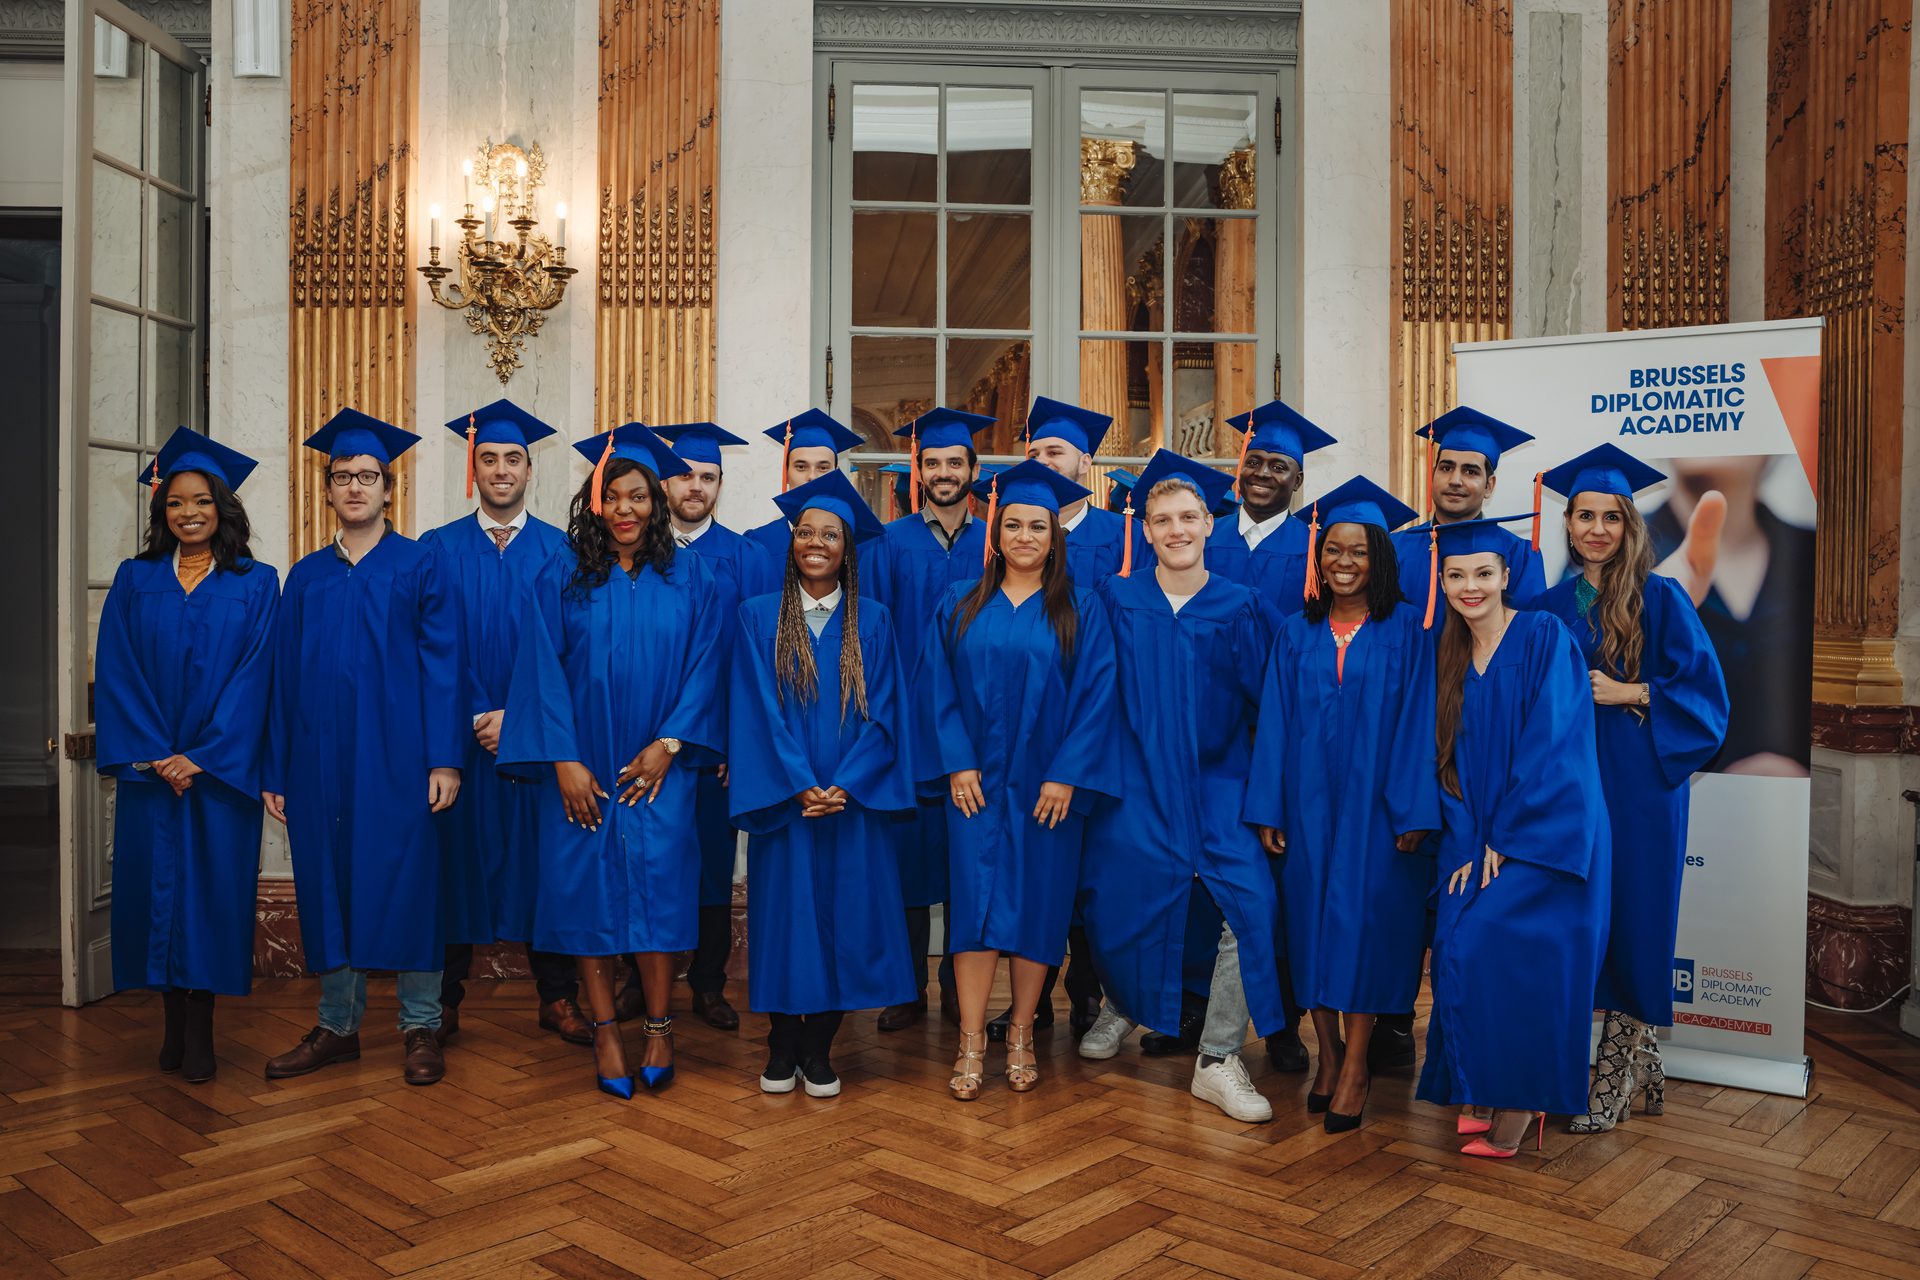 Brussels Diplomatic Academy – join the new year ahead!